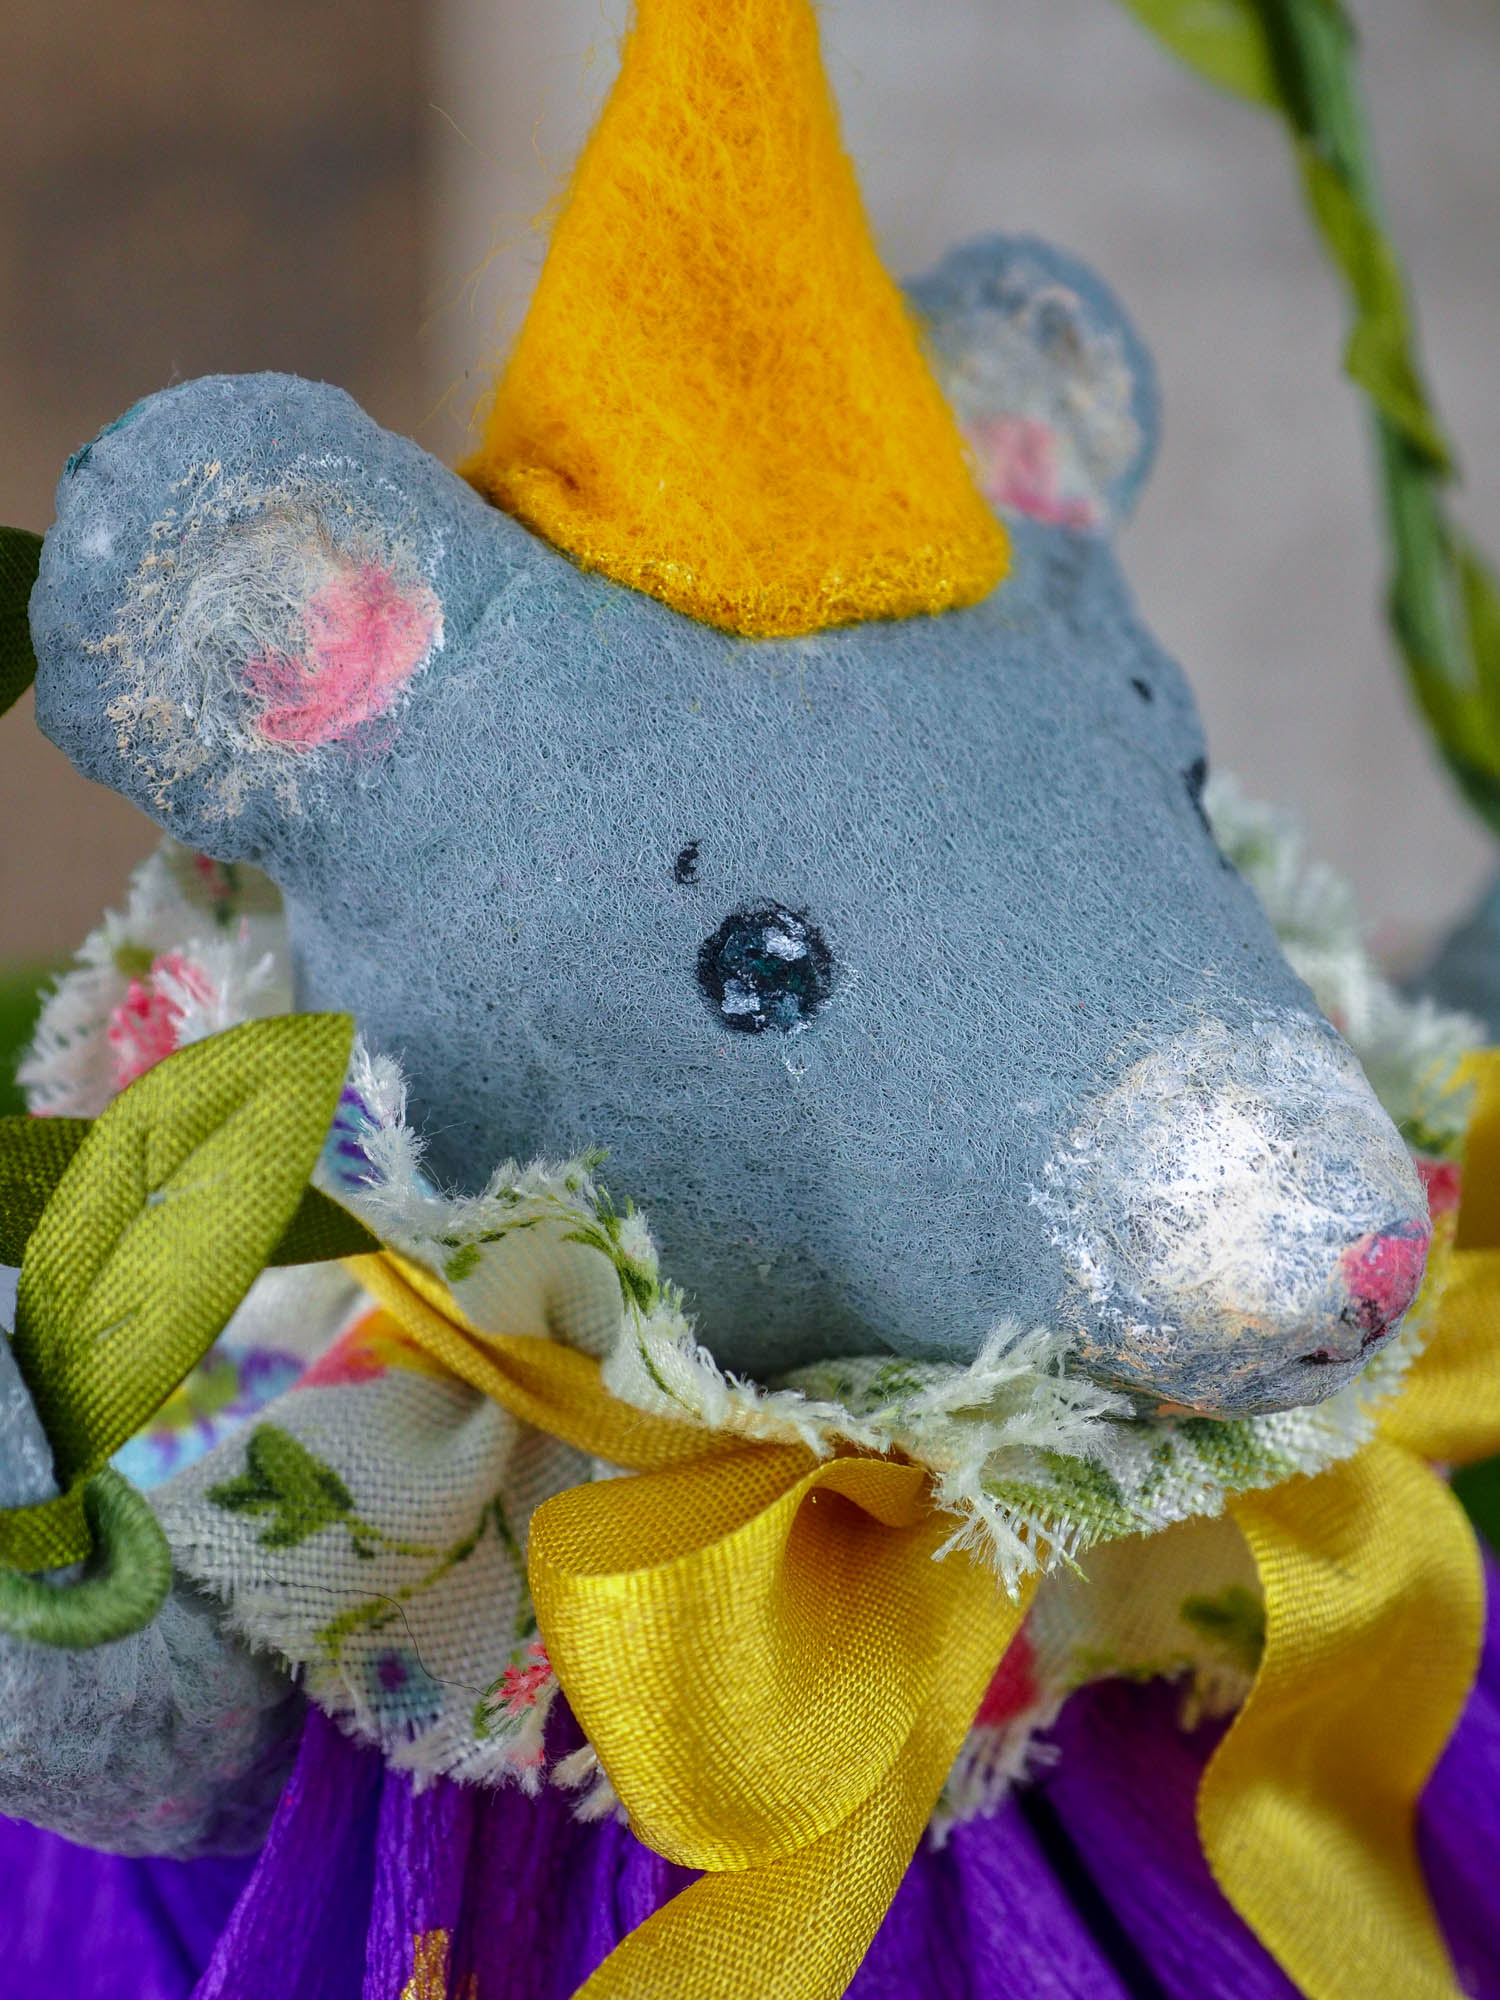 Spring always inspires Danita to make beautiful handmade decorations for when the flowers start to bloom, just like this 6" spun cotton handmade grey mouse art doll by Danita, hand painted and dressed in a hand painted polka dot paper skirt.